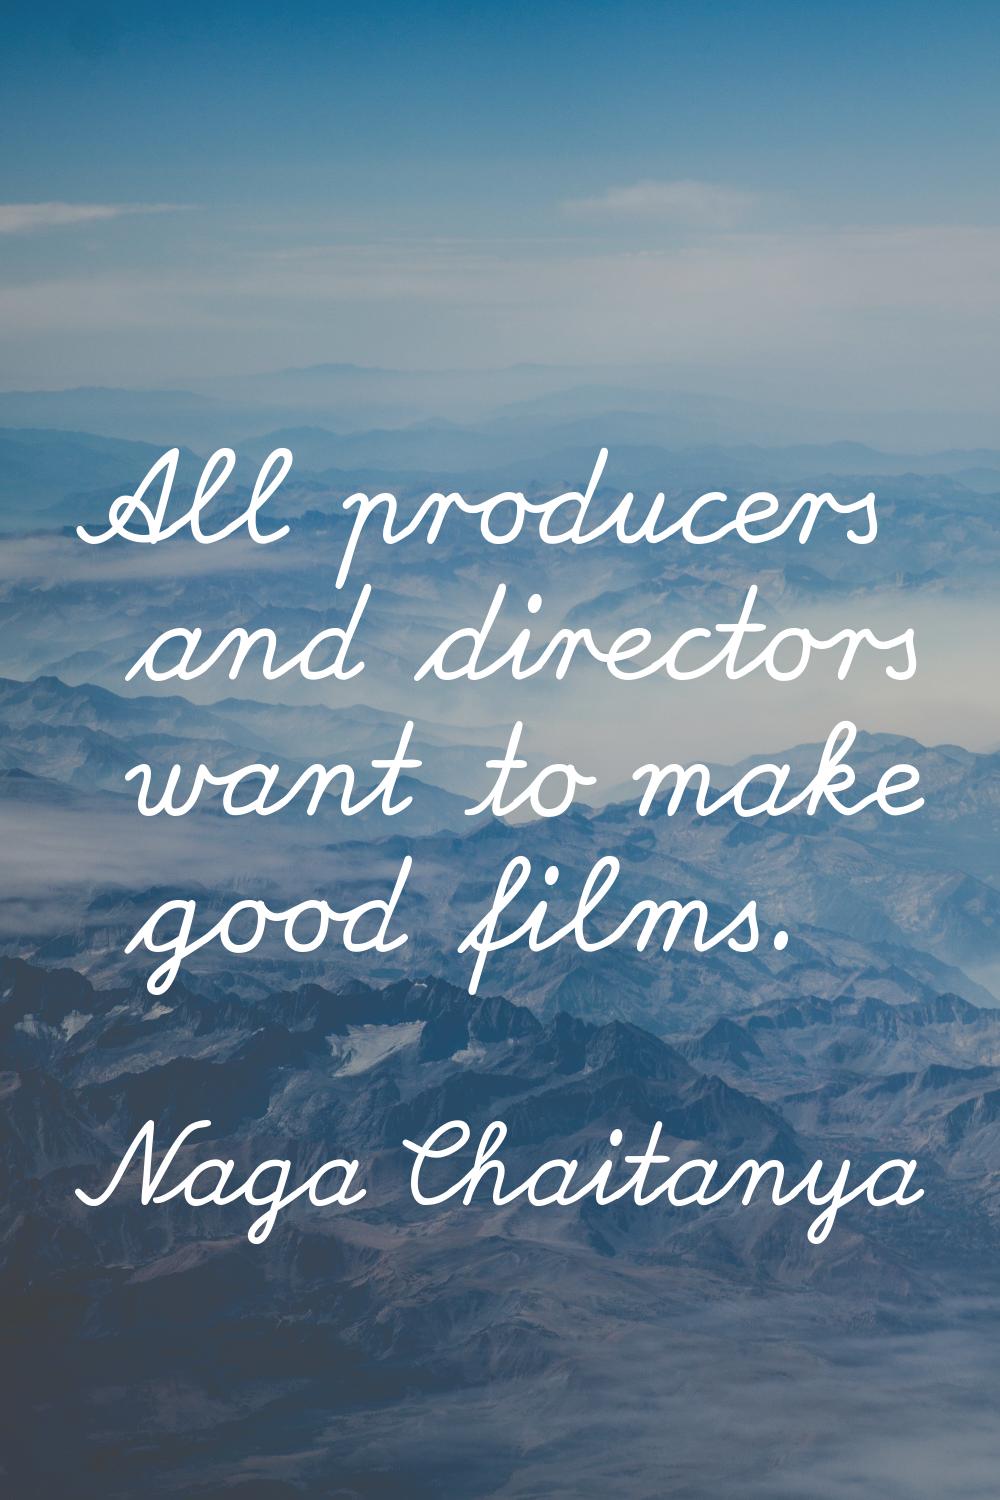 All producers and directors want to make good films.